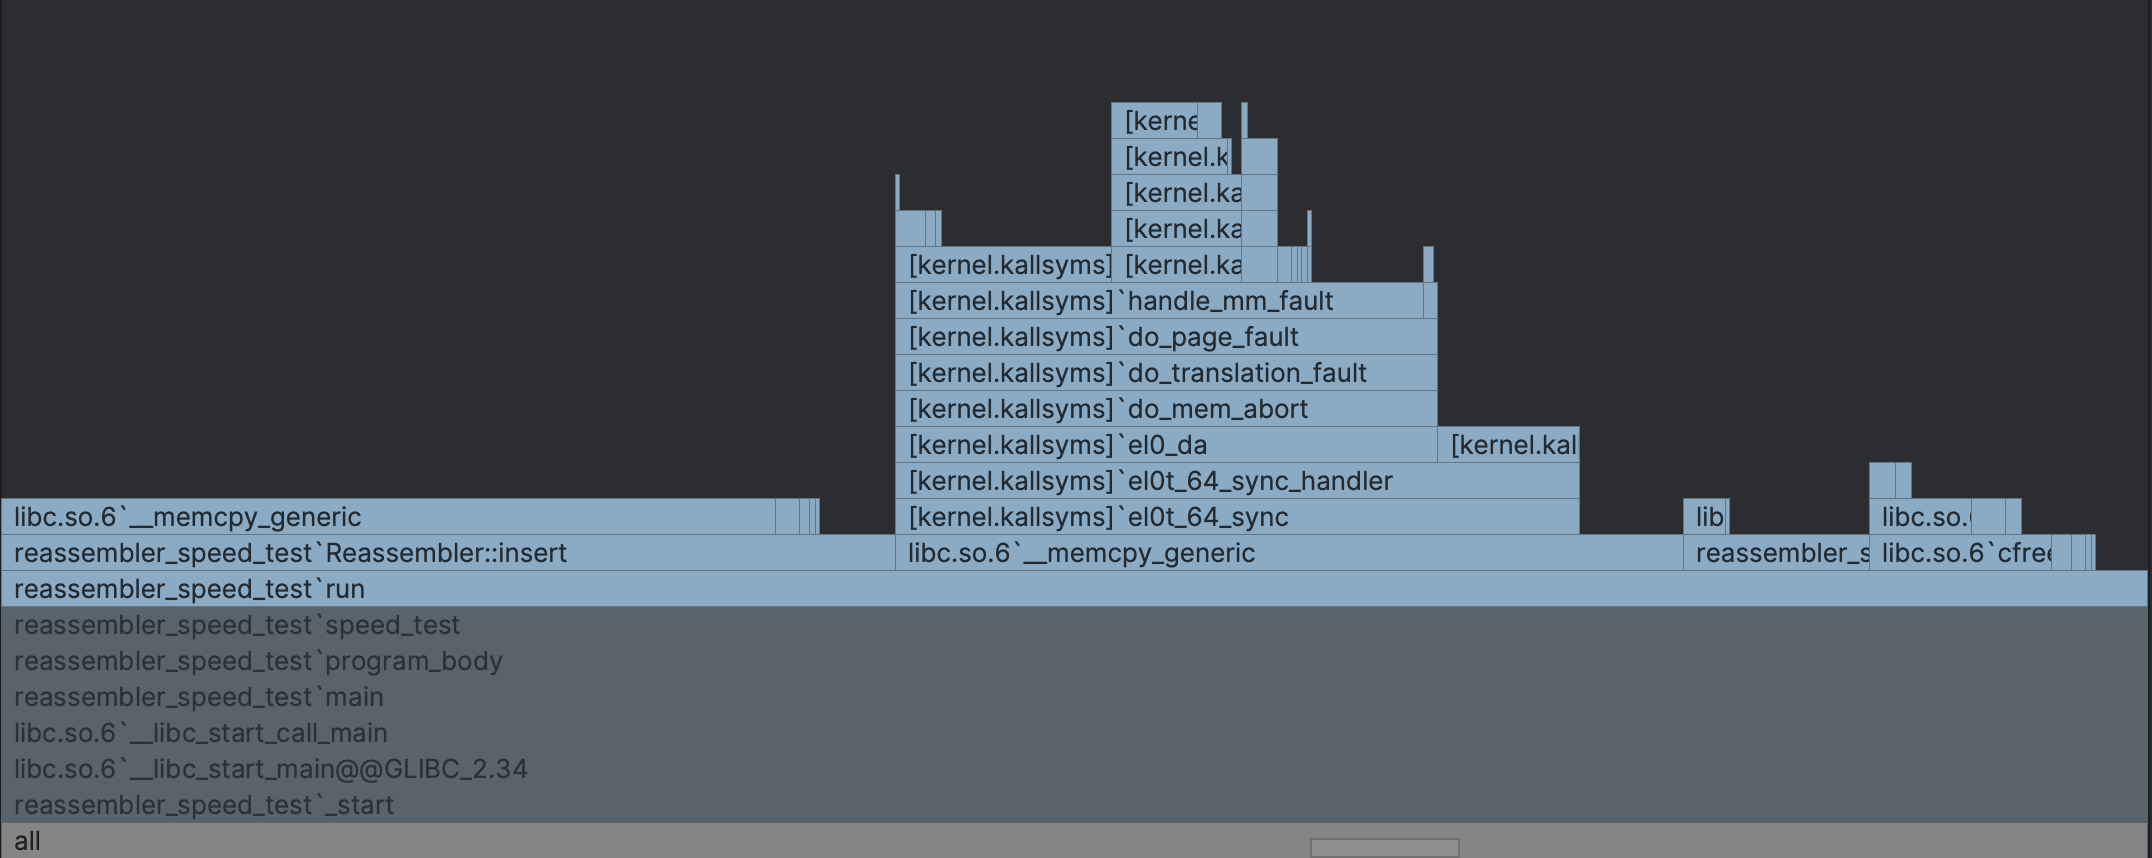 Flamegraph for the reassembler benchmark